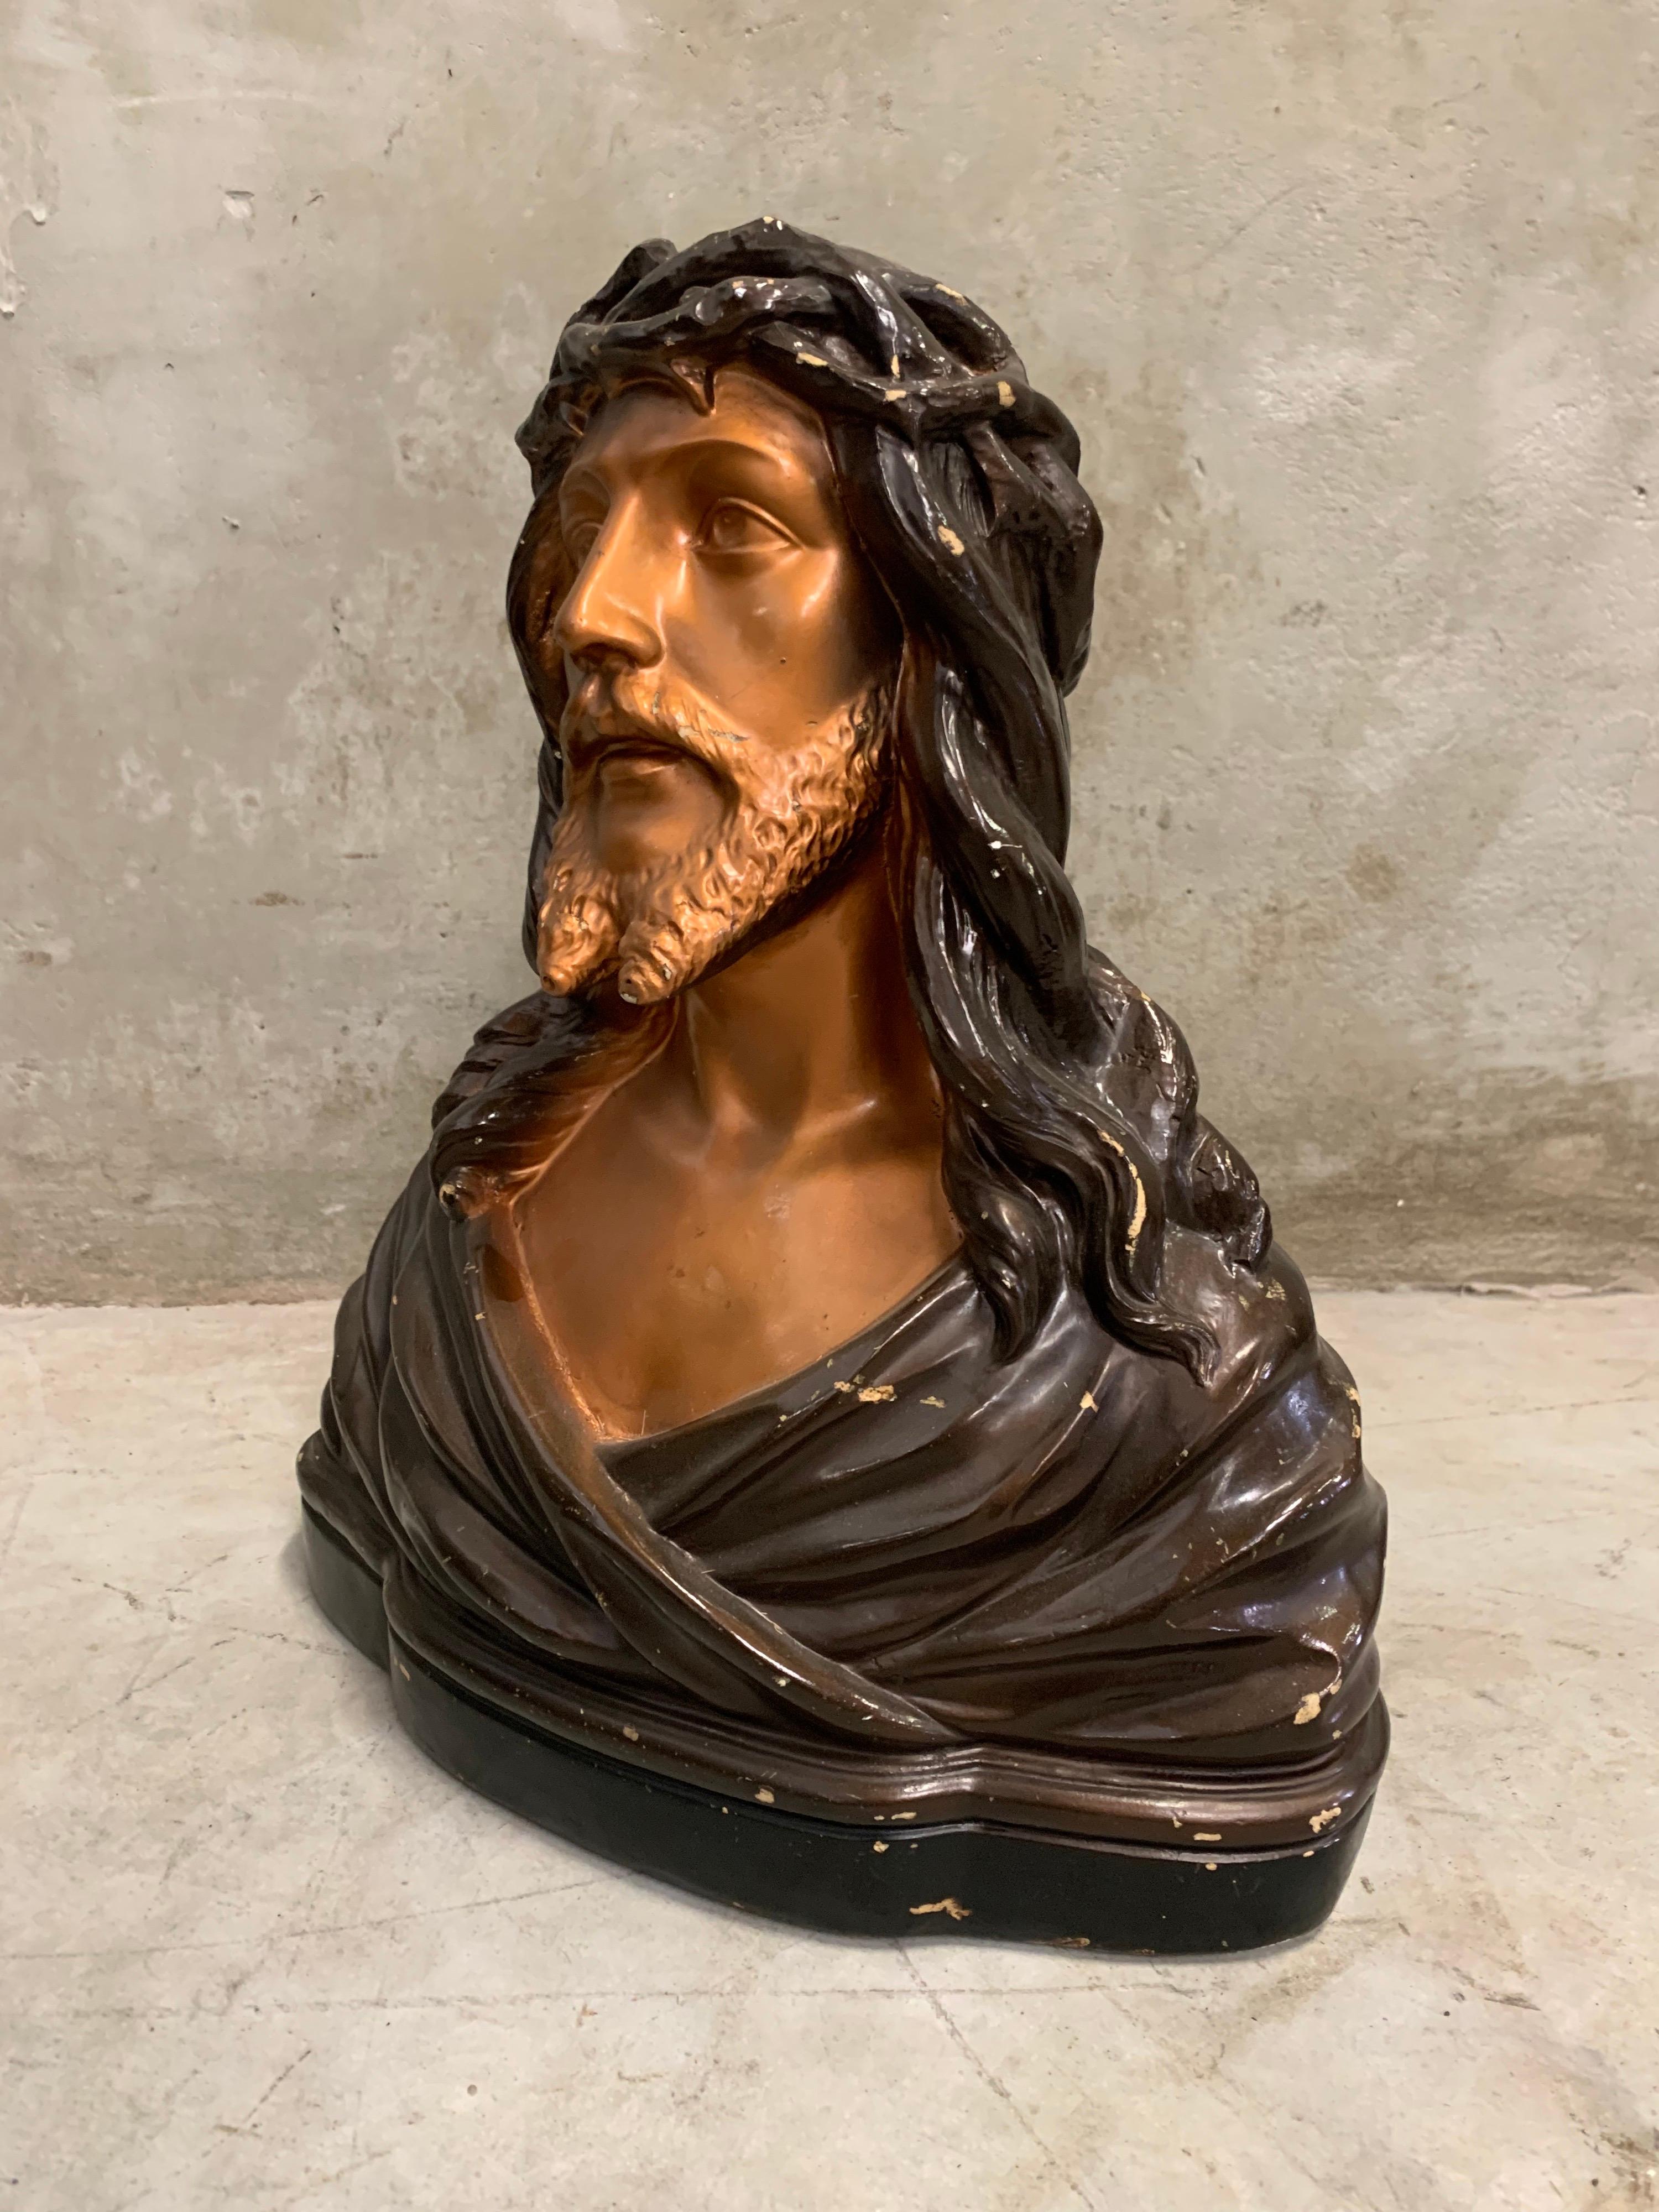 Beautiful and rare Jezus bust made by Jean Carli around 1920. Nice details and colours. Some small chipping but overall still an eyecatcher. The buste is numbered and signed at the back. Was made in France of plaster which has been glazed.

No